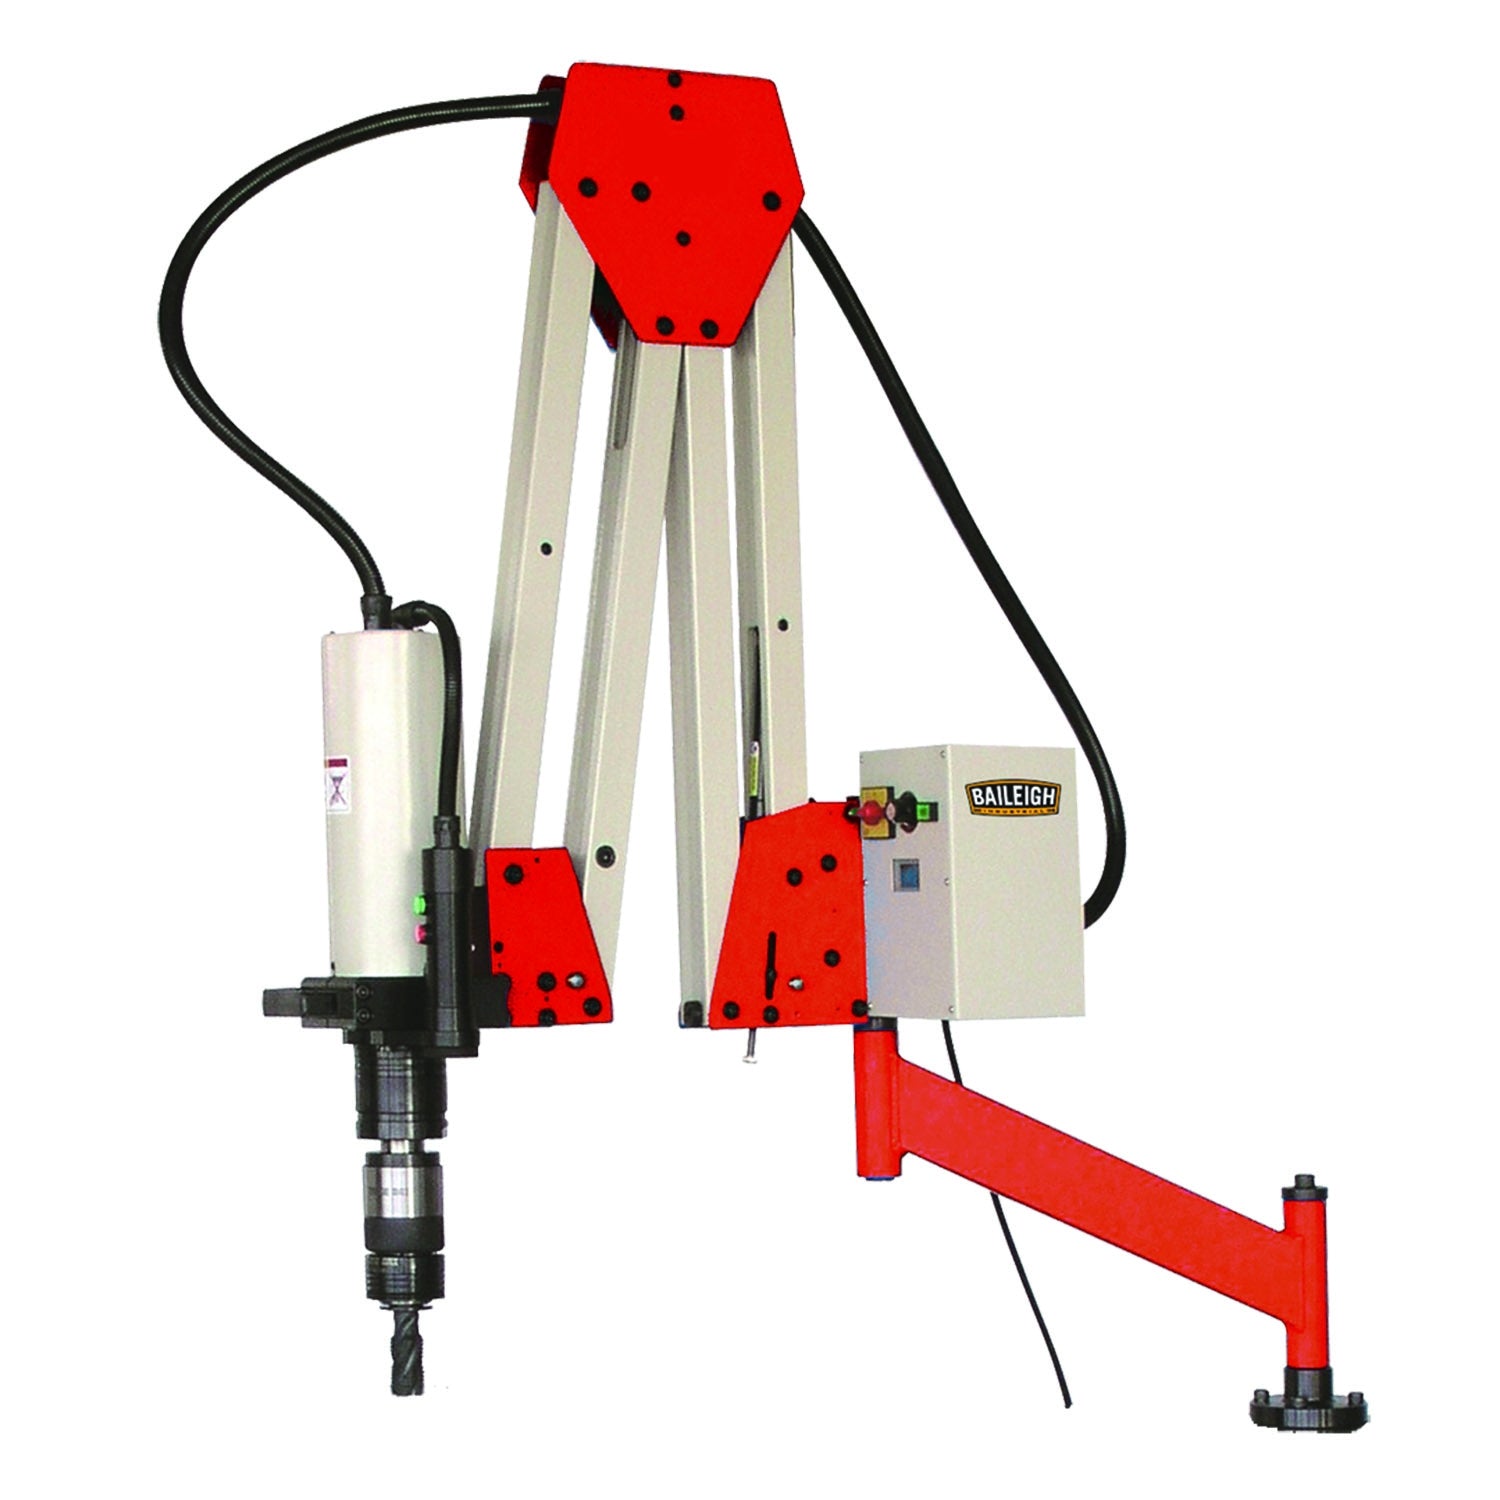 Baileigh ETM-32-1500 220V 1 Phase Double Arm Articulated Tapping Machine, 1/8"-1-1/4" Tap Capacity, 74" Work Range